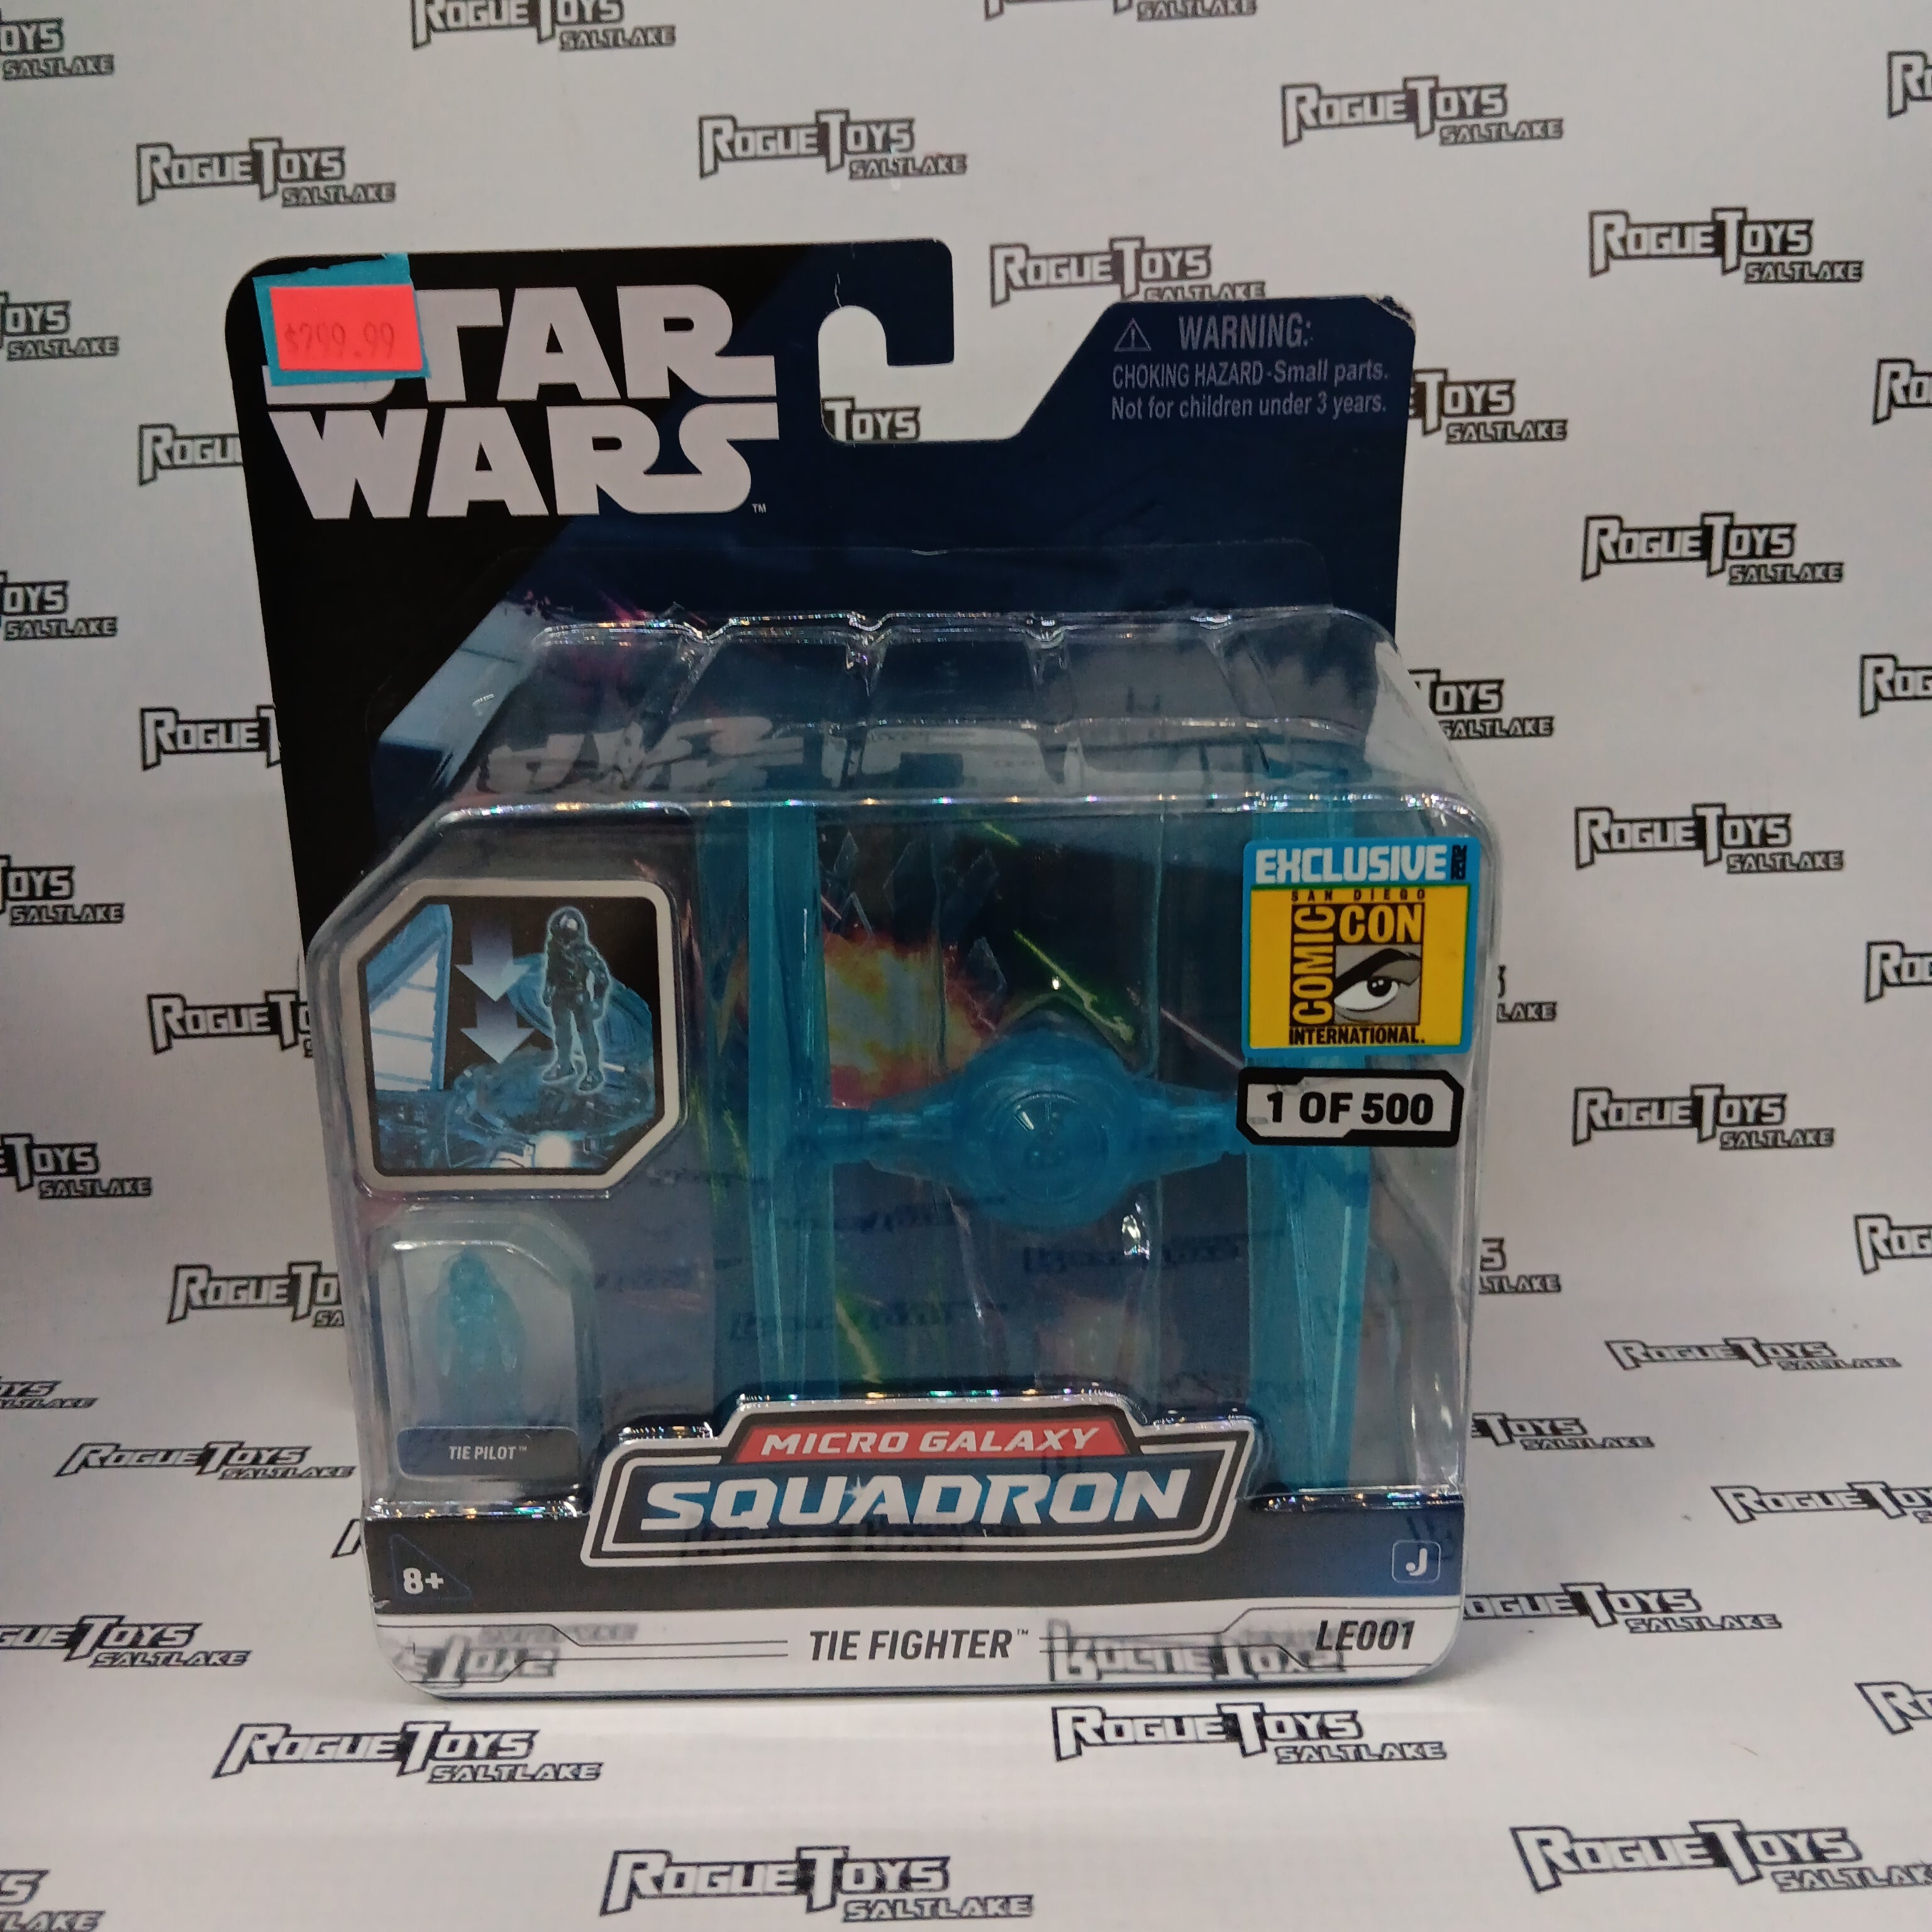 Jazwares Star Wars Micro Galaxy Squadron SDCC 2022 Exclusive Tie Fighter (1 of 500)